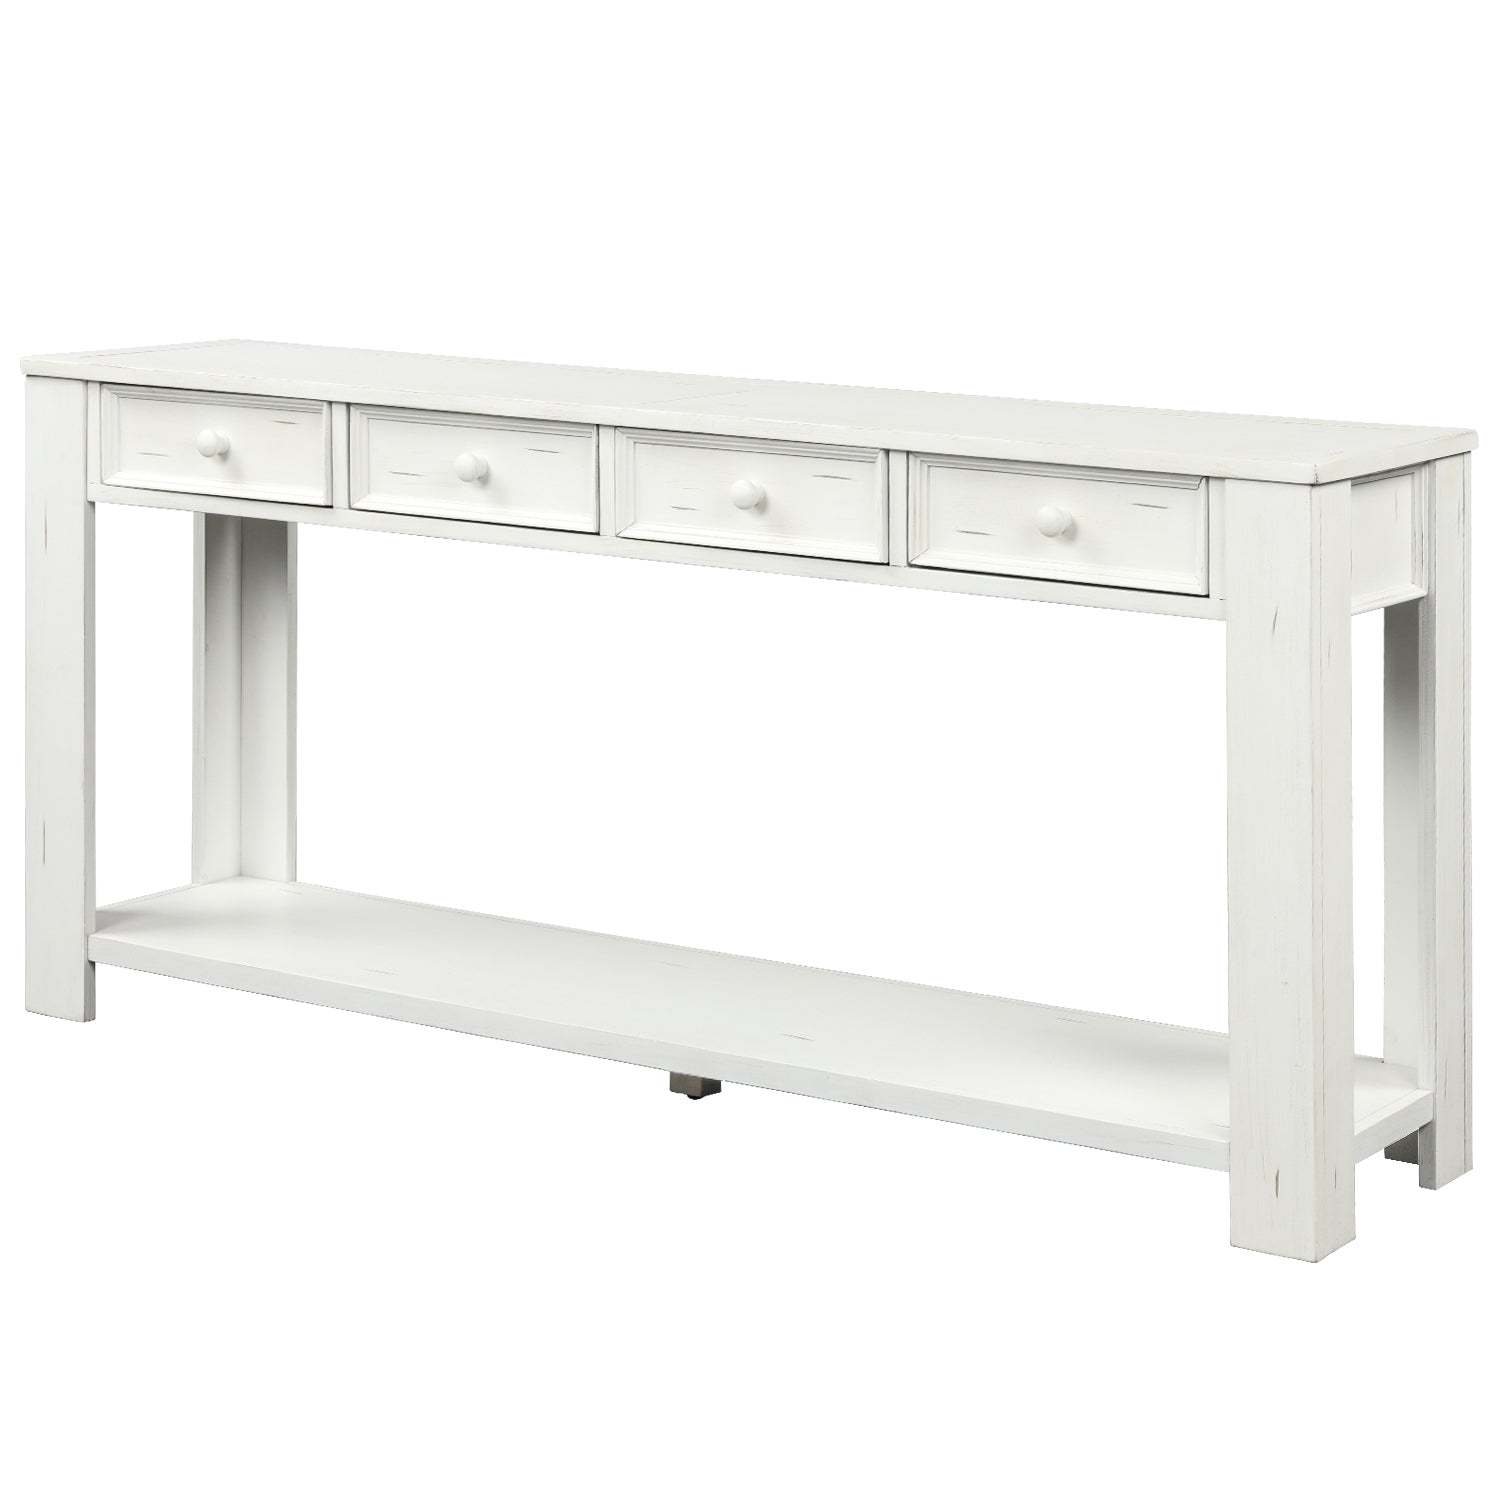 TREXM Console Table for Entryway Hallway Sofa Table with Storage Drawers and Bottom Shelf ( Antique White)